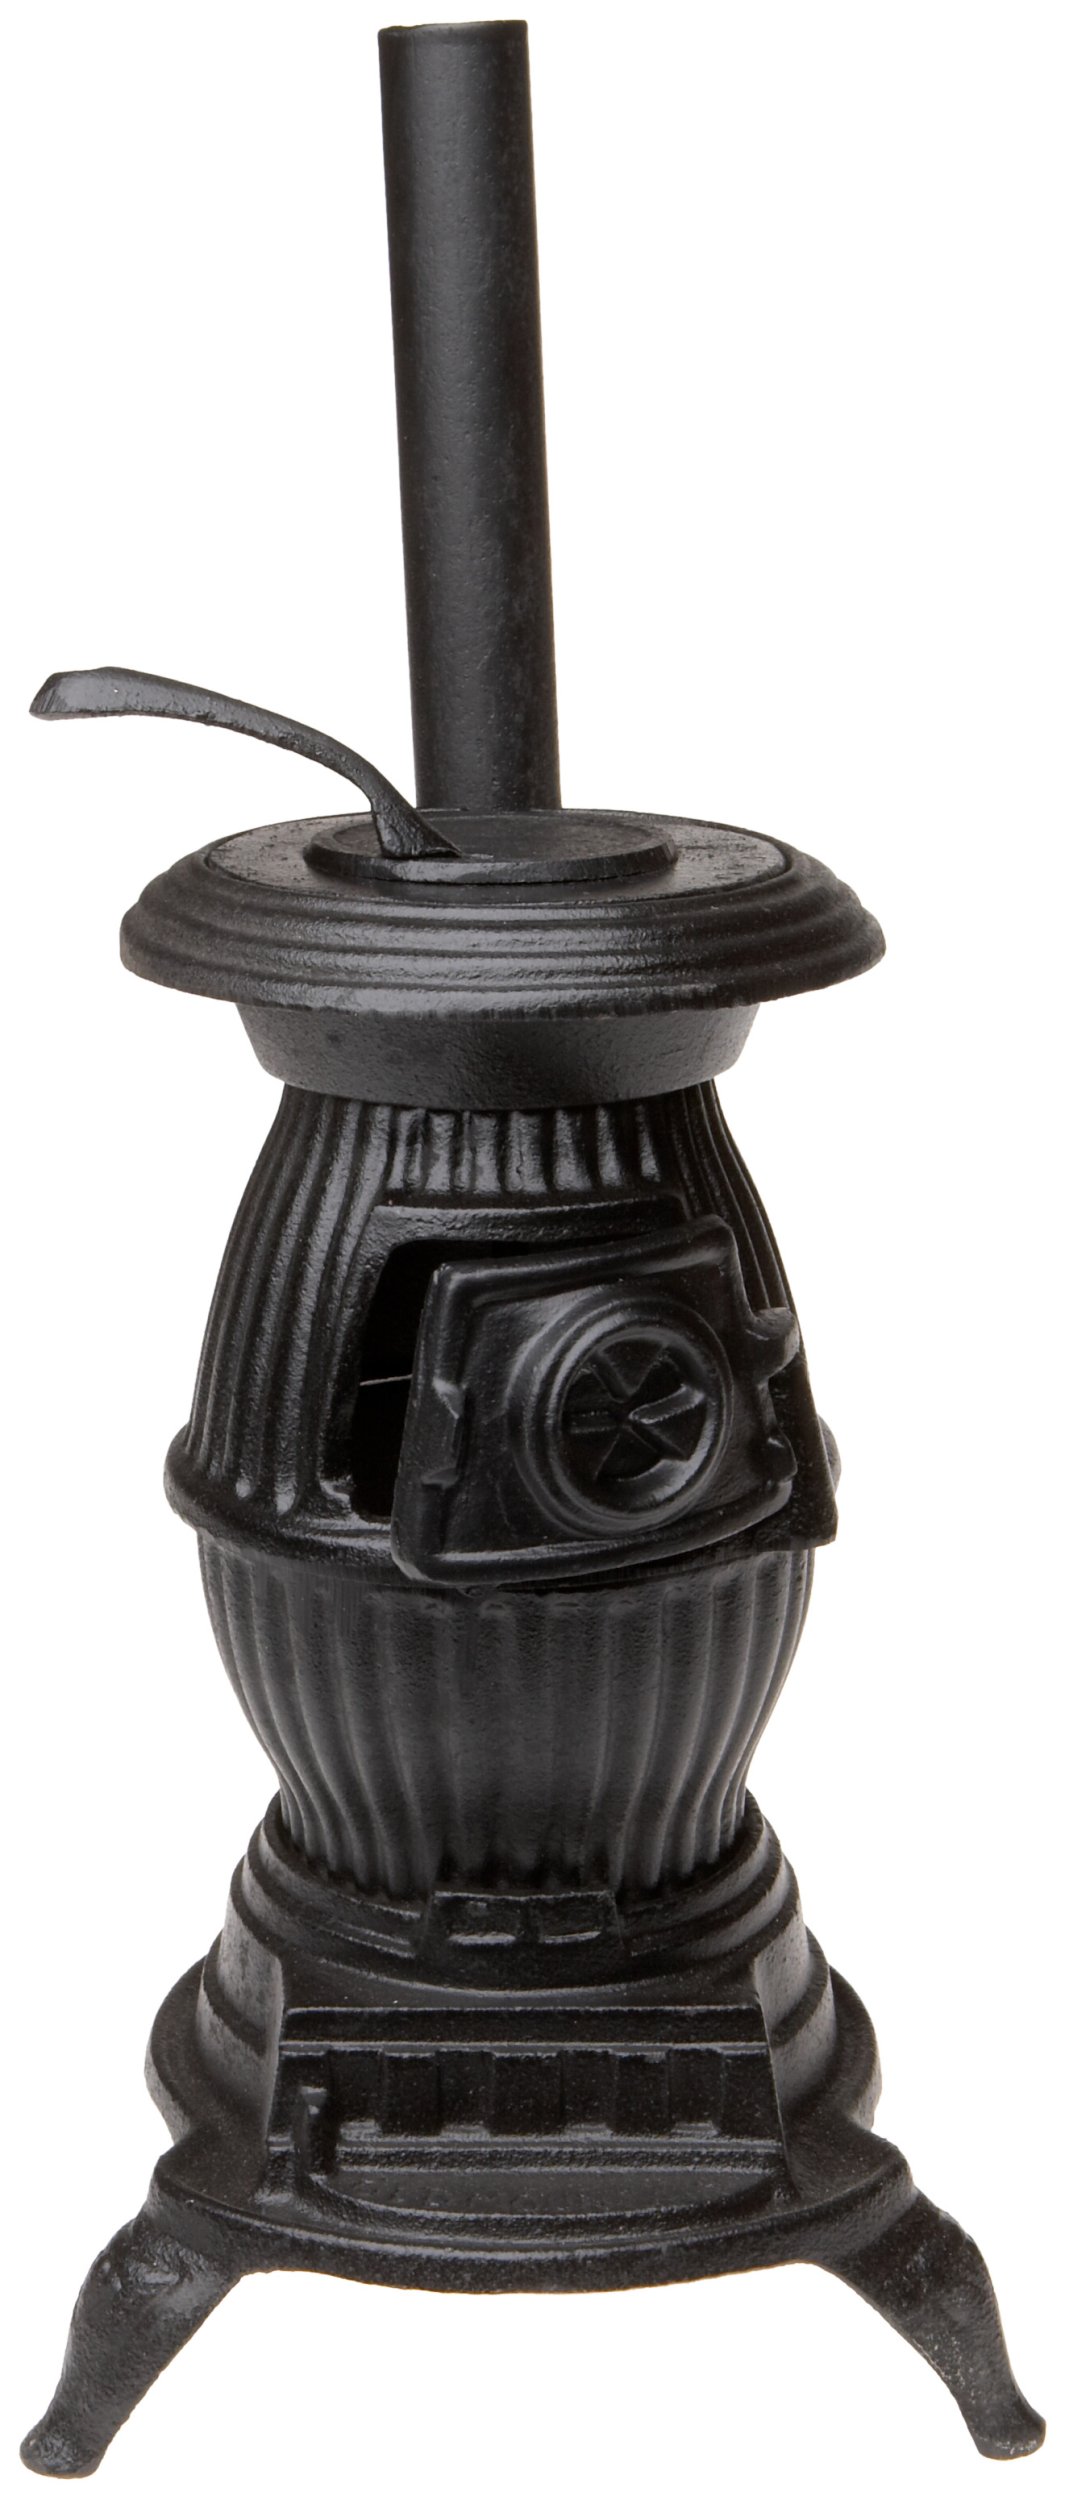 Old Mountain Black Mini Pot Belly Stove Set, with Accessories, 13 Inch Tall